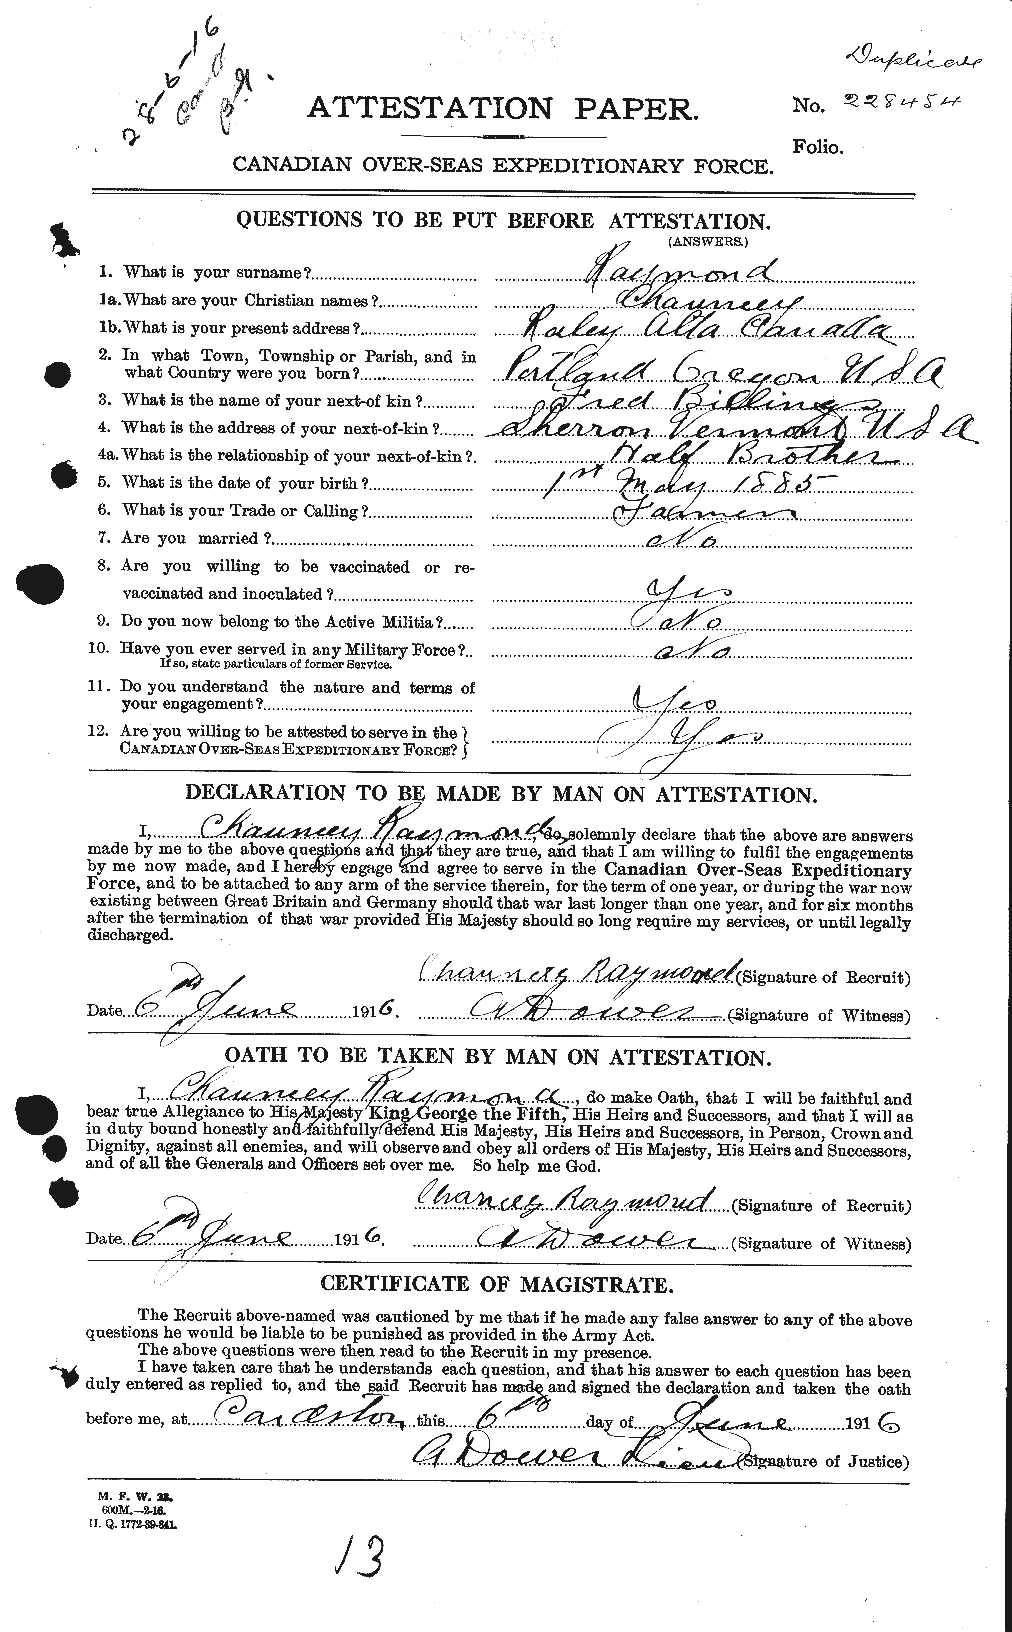 Personnel Records of the First World War - CEF 595282a